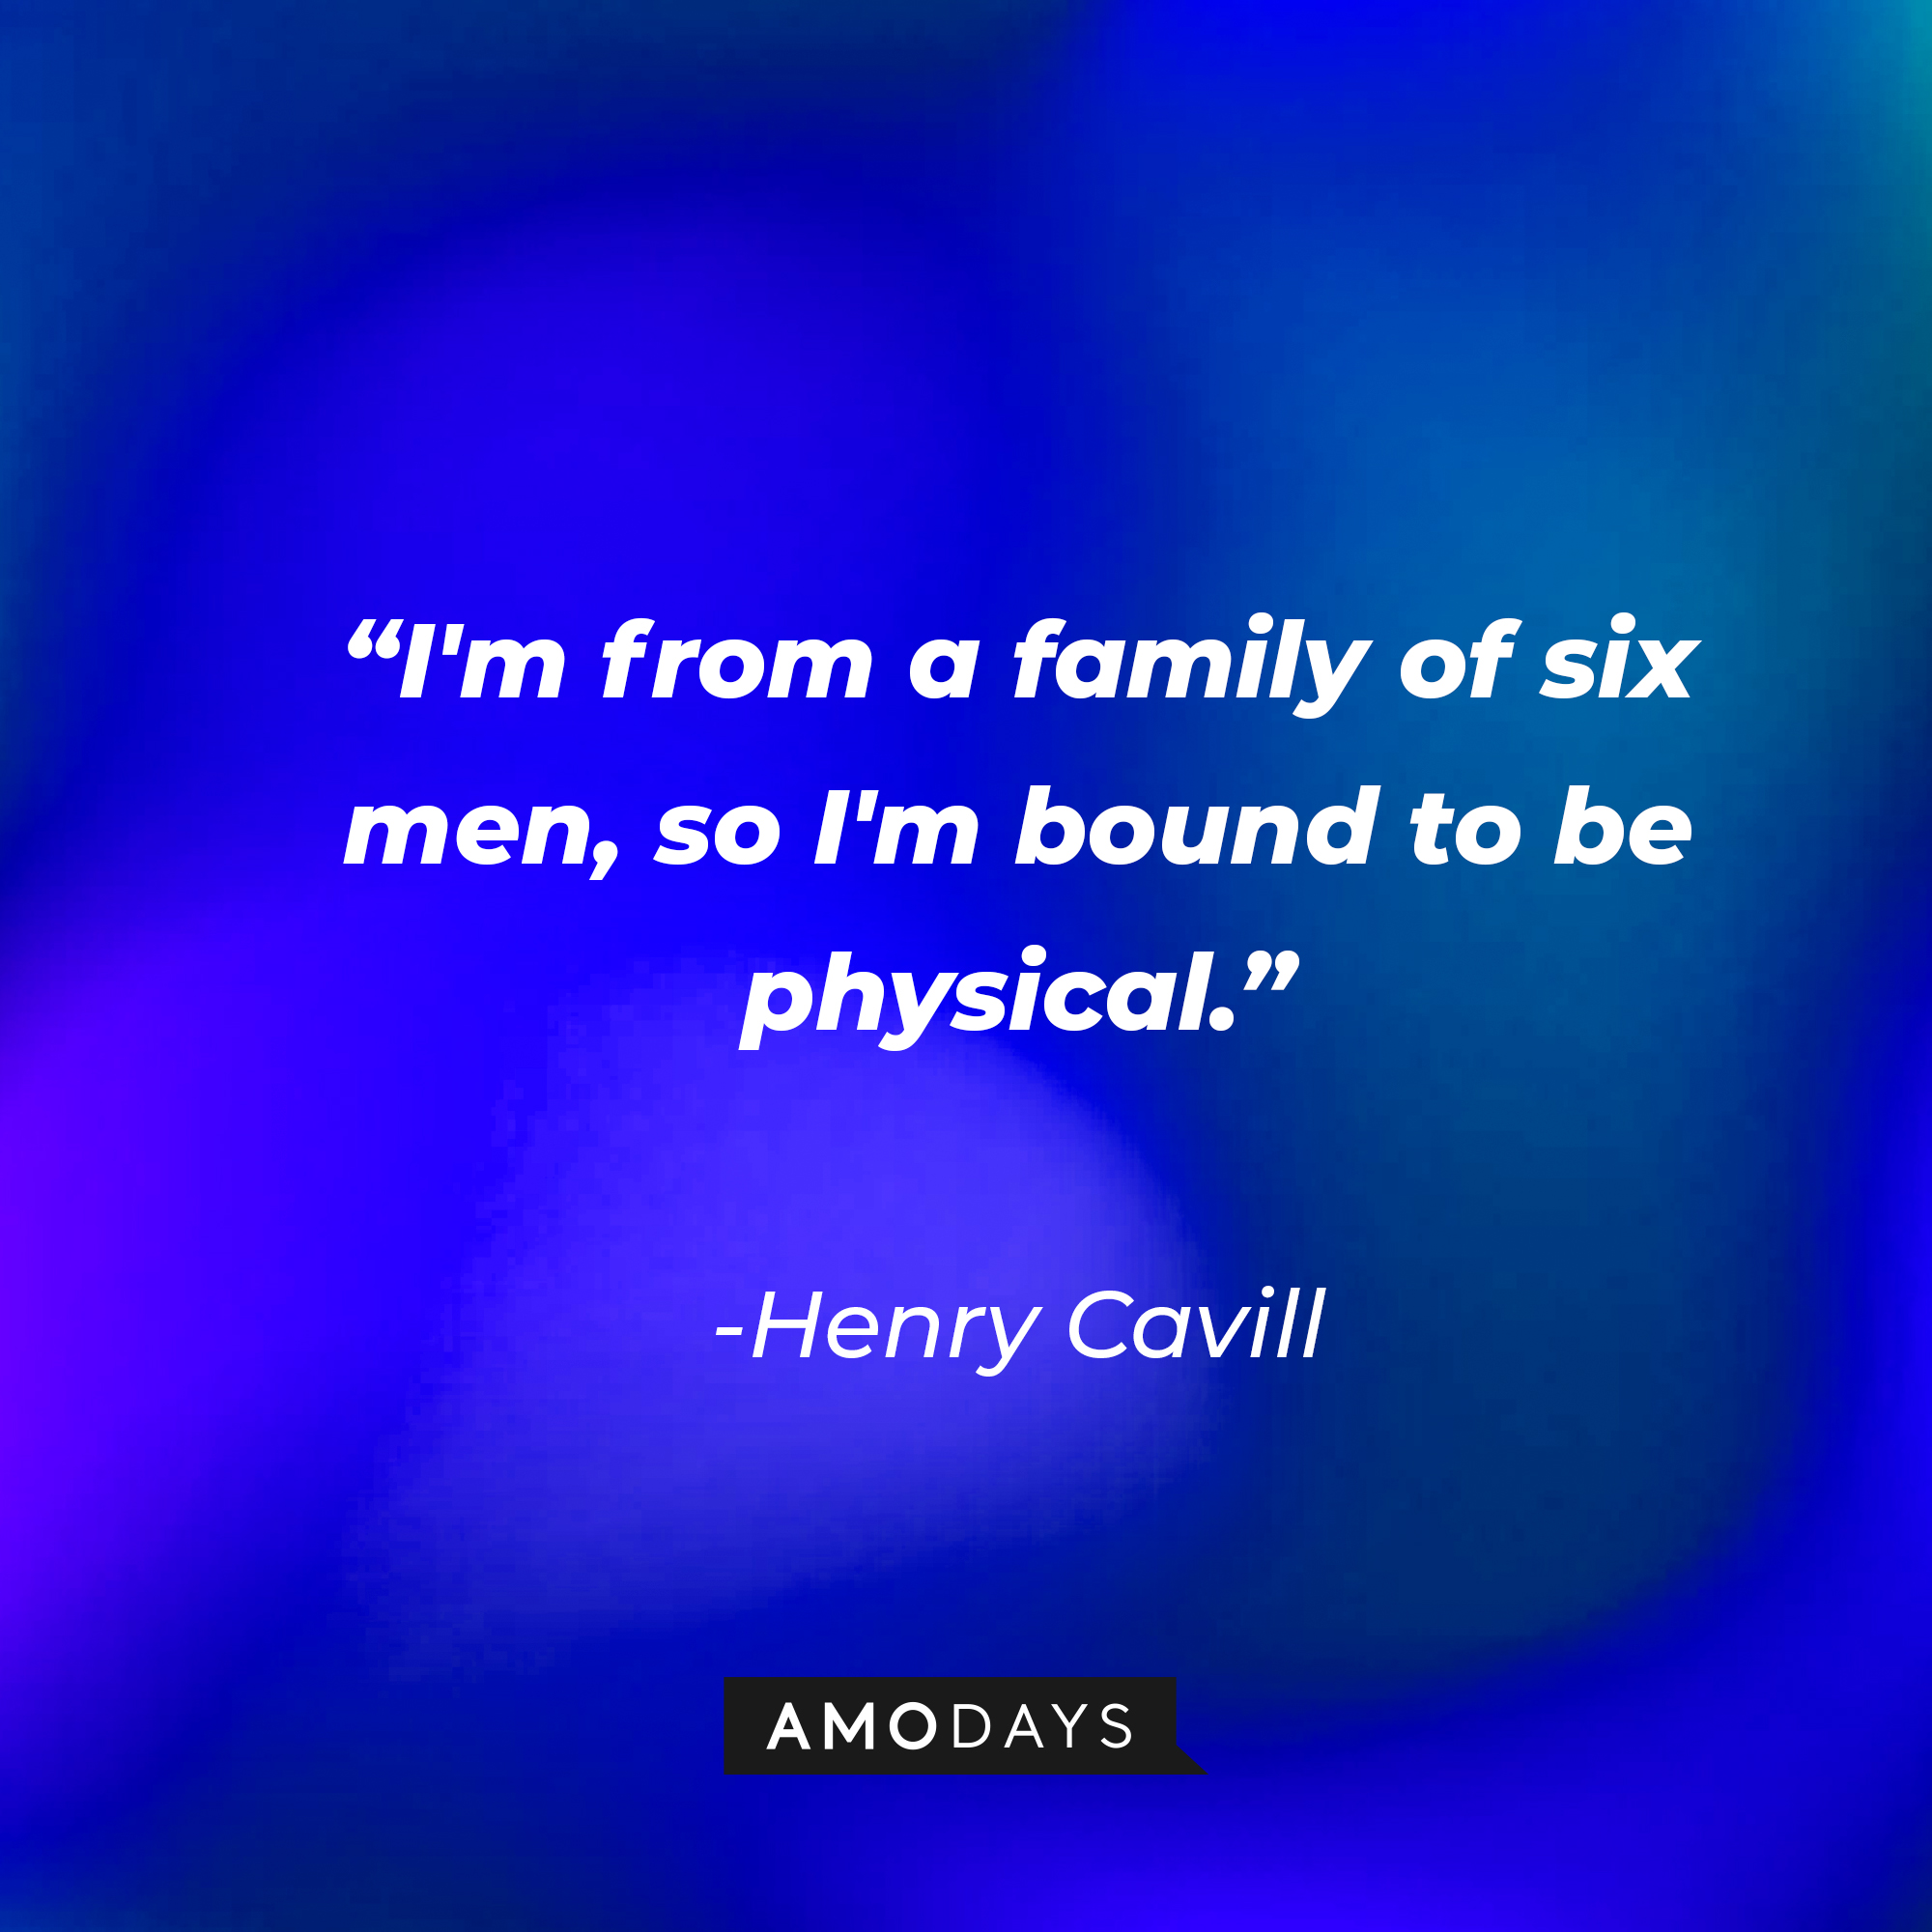 Henry Cavill’s quote: “I'm from a family of six men, so I'm bound to be physical.” | Source: AmoDays